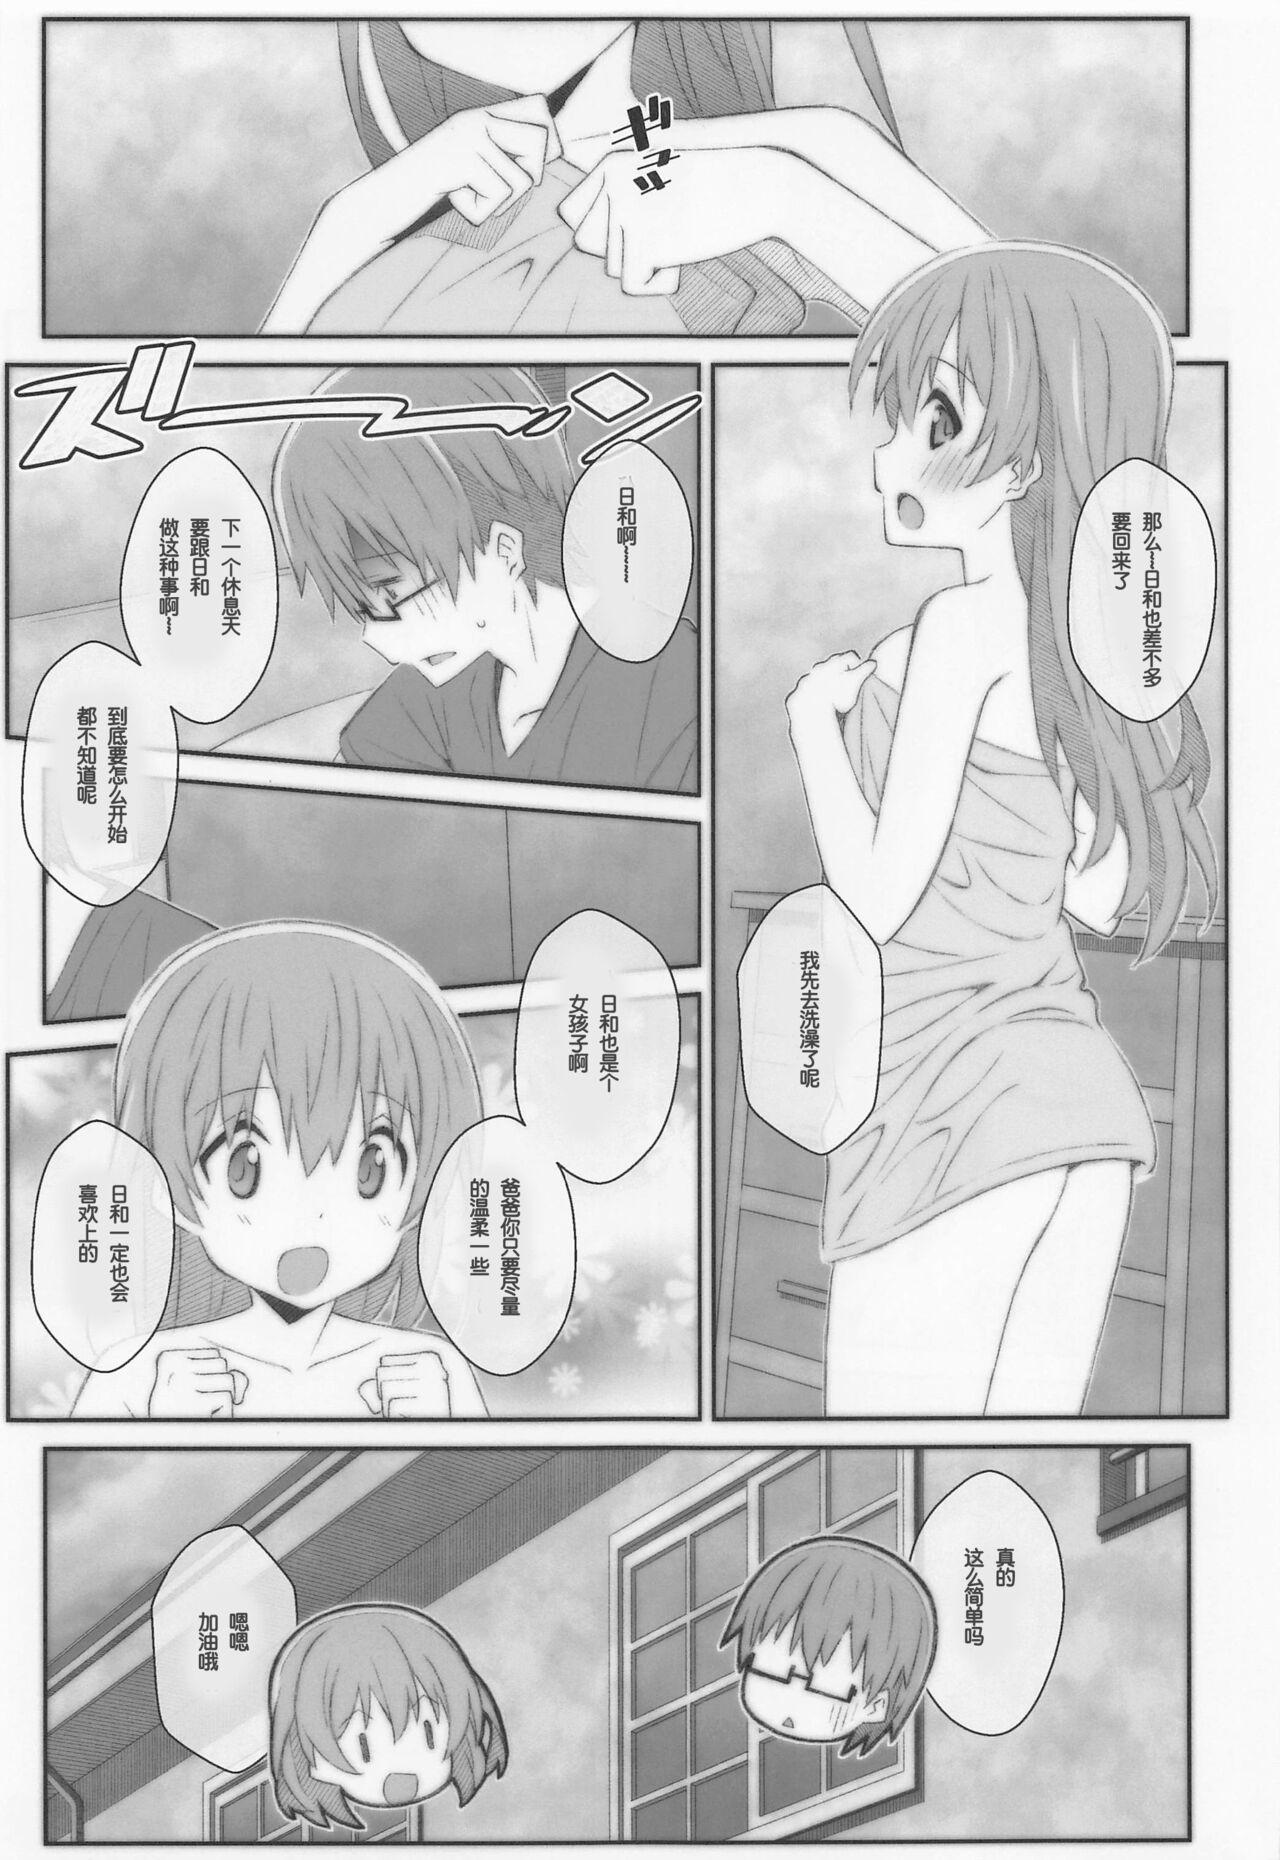 Colombiana TYPE-66a - Slow loop Babysitter - Page 10